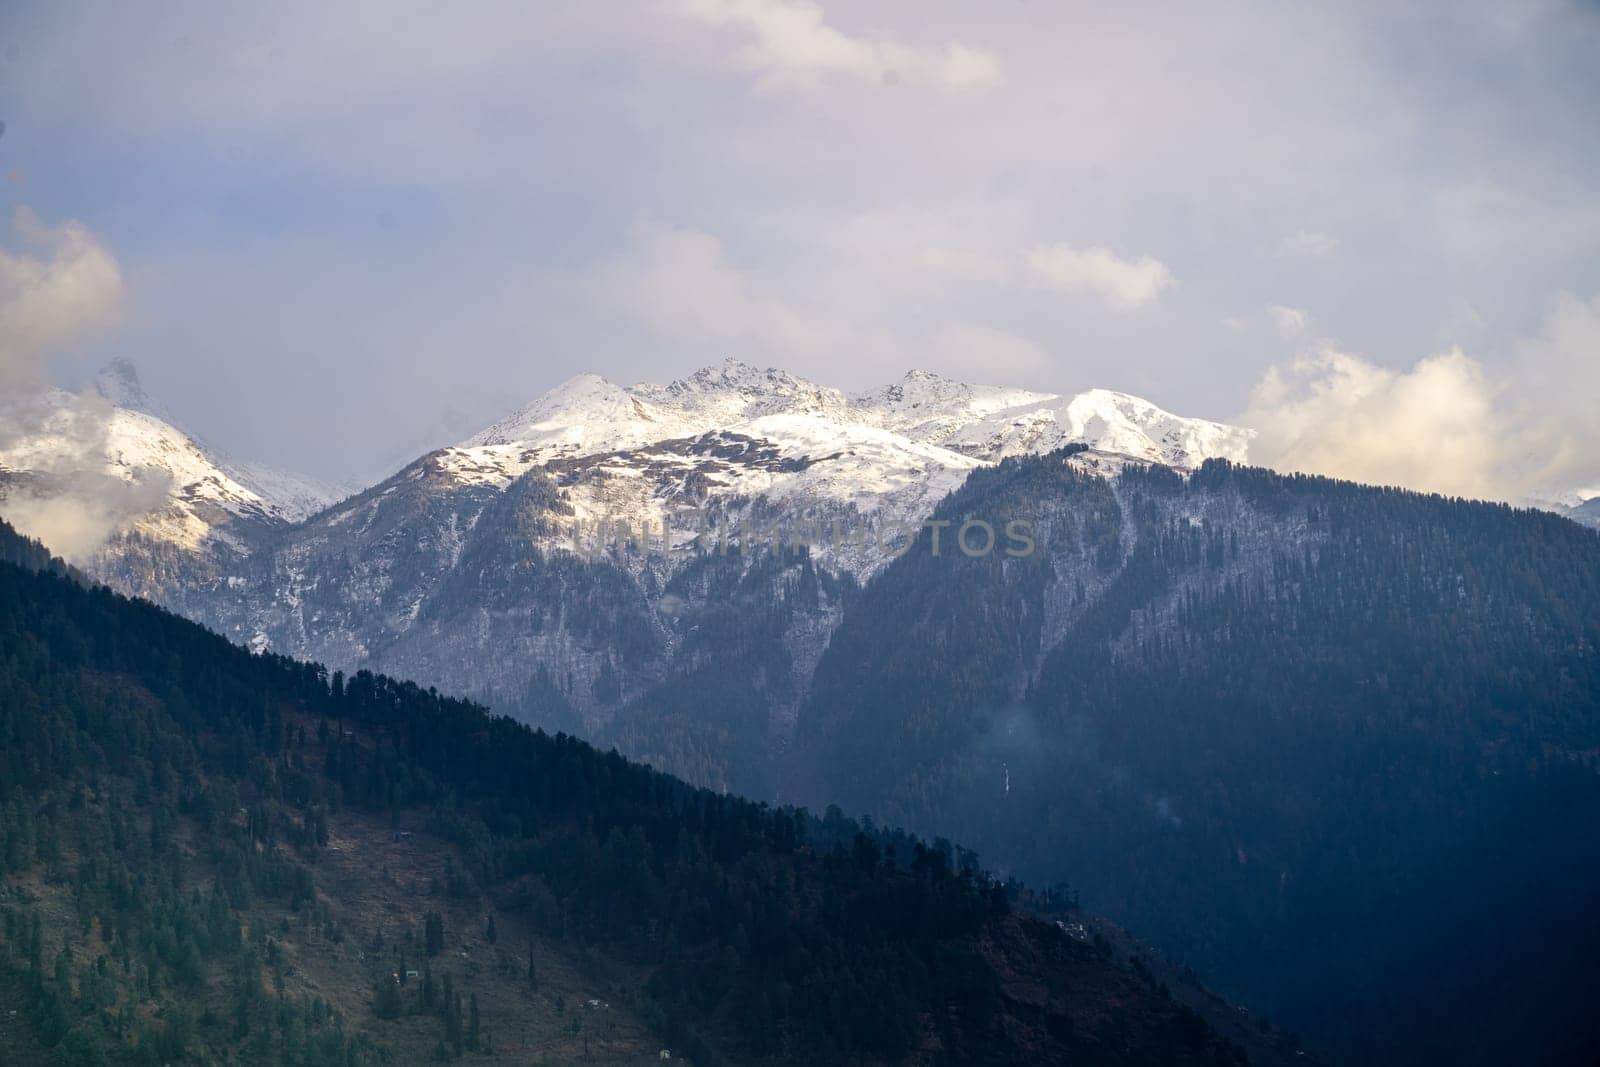 fog mist rolling over tree covered mountains in the foreground and snow capped peak in the background in manali himachal pradesh by Shalinimathur